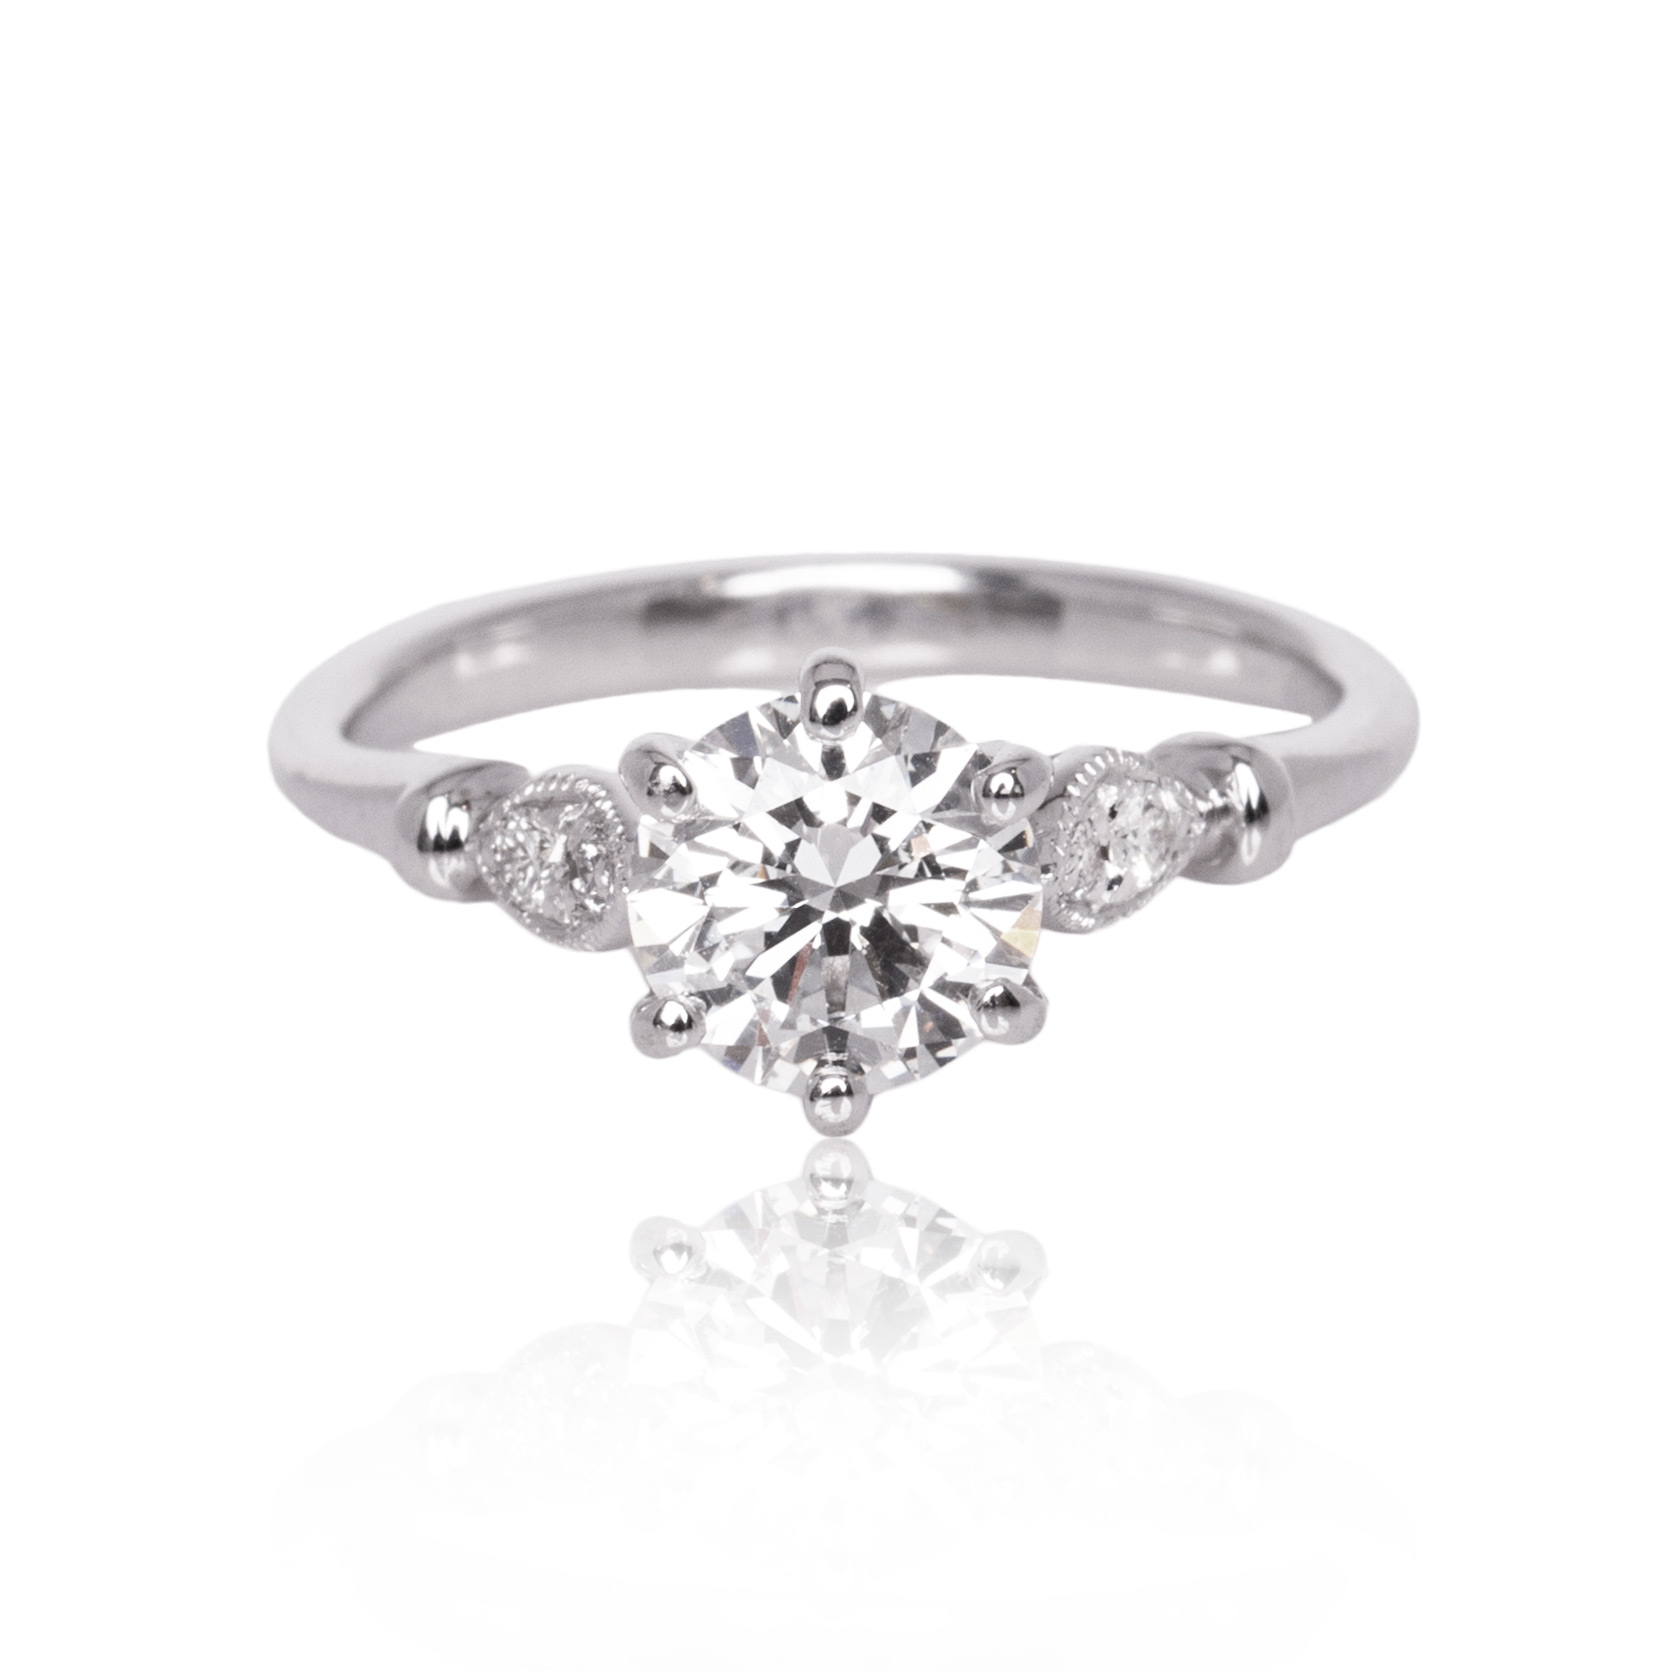 176-continental-jewels-manufacturers-ring-cjr000176-18k-white-gold-vvs1-solitare-diamonds-customised-ring.jpg